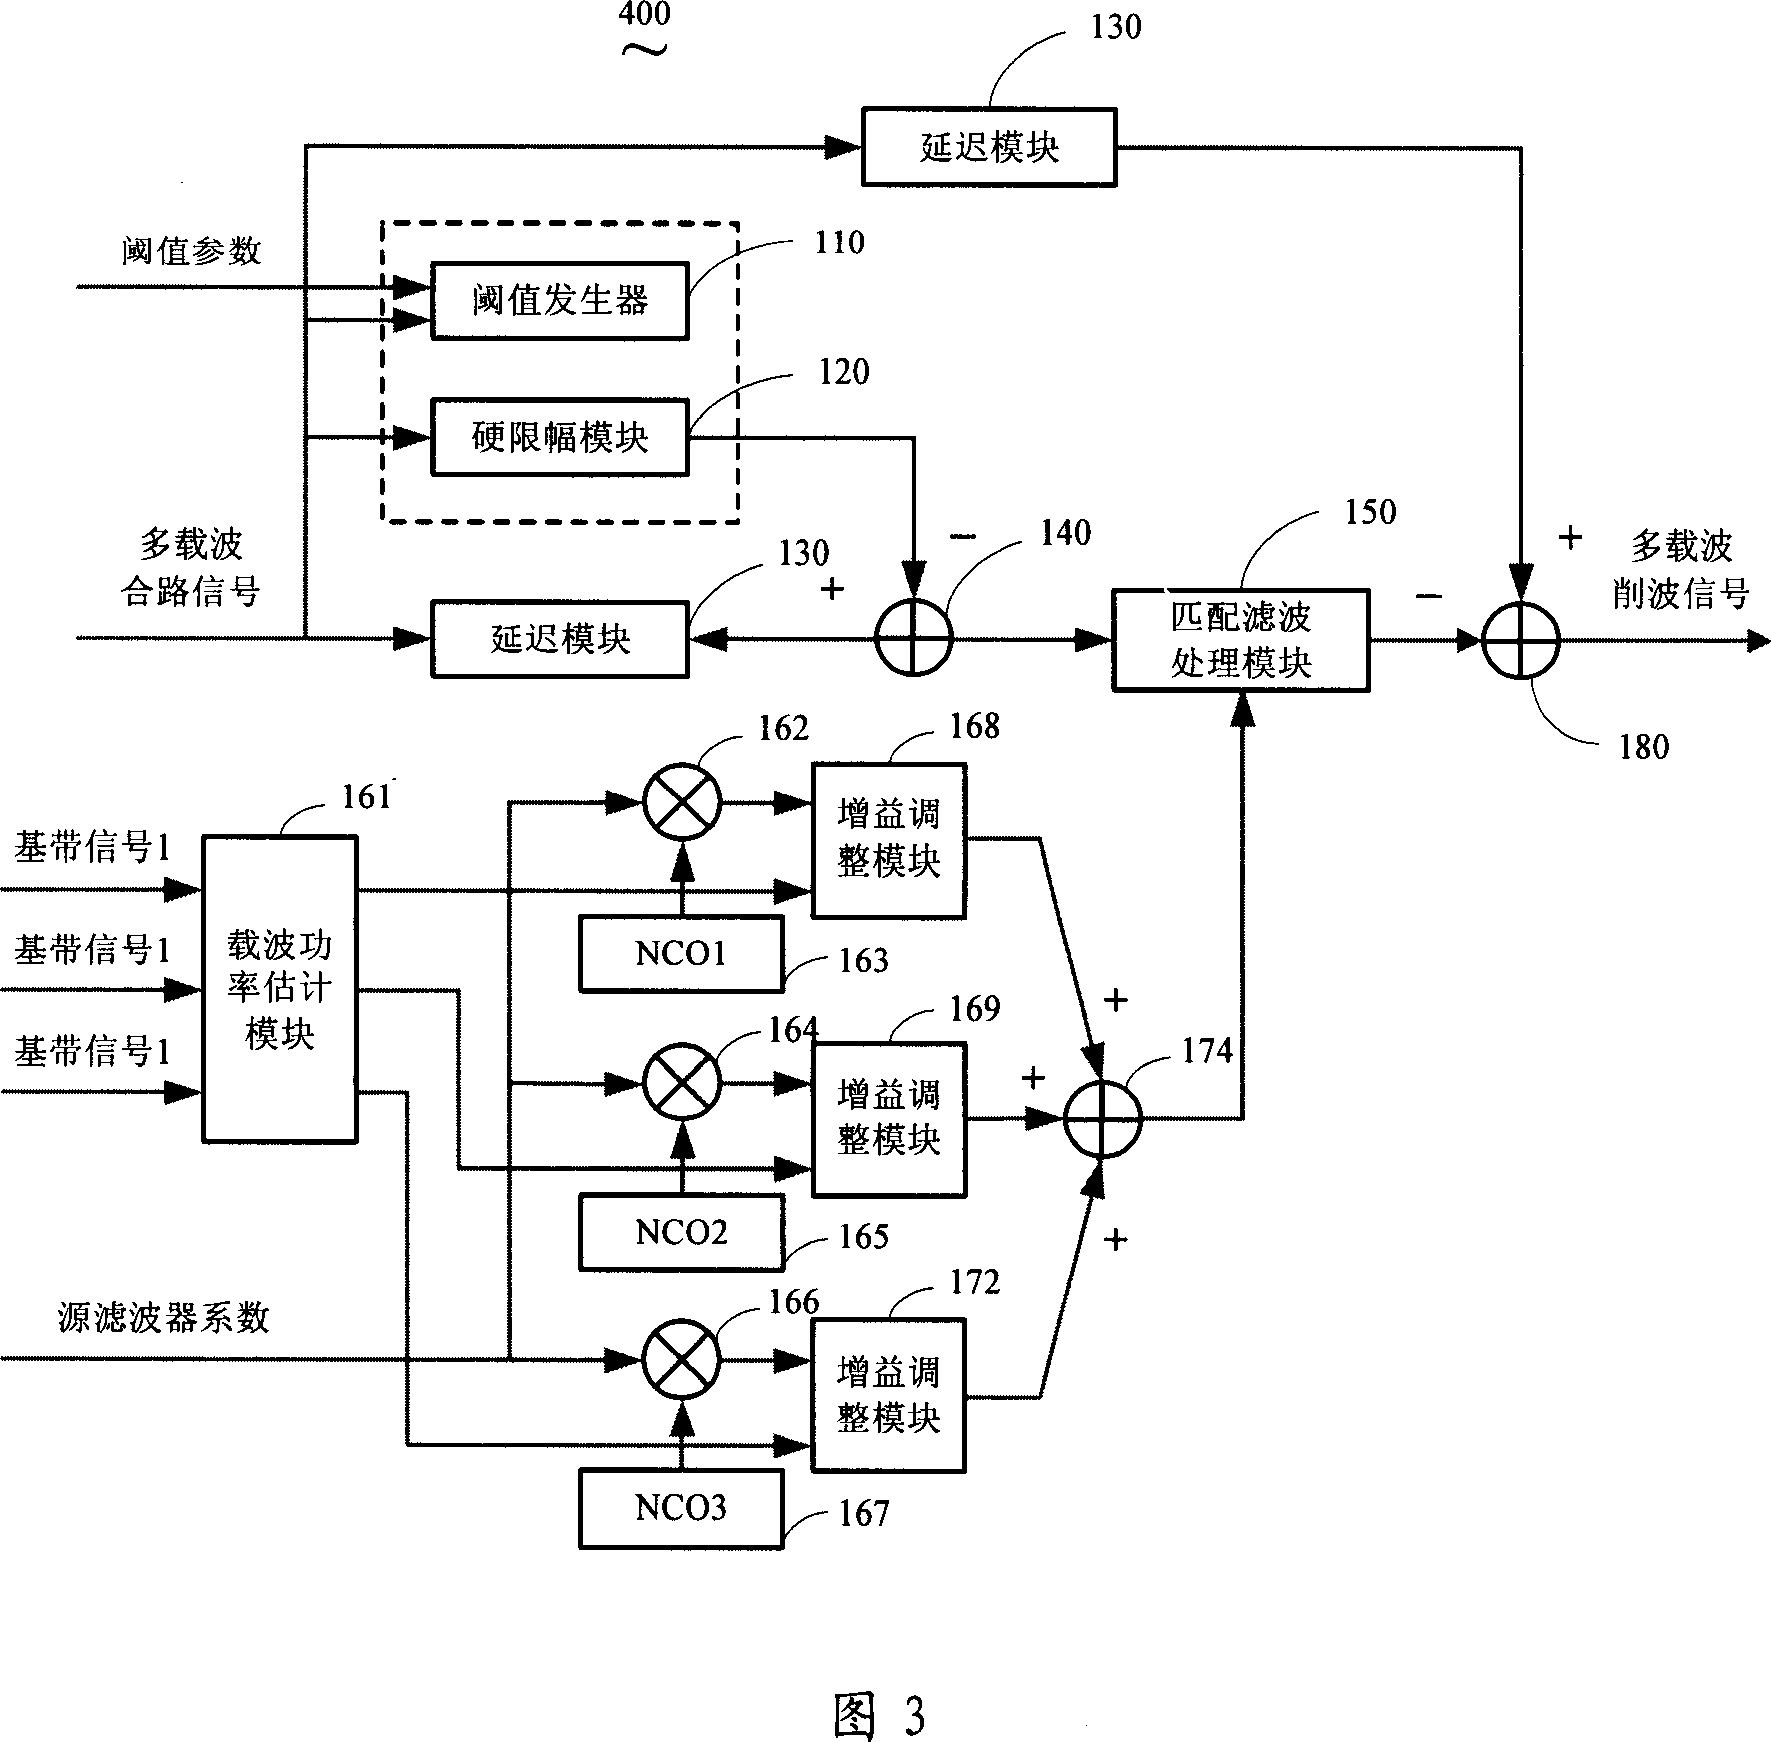 A multi-carrier communication system